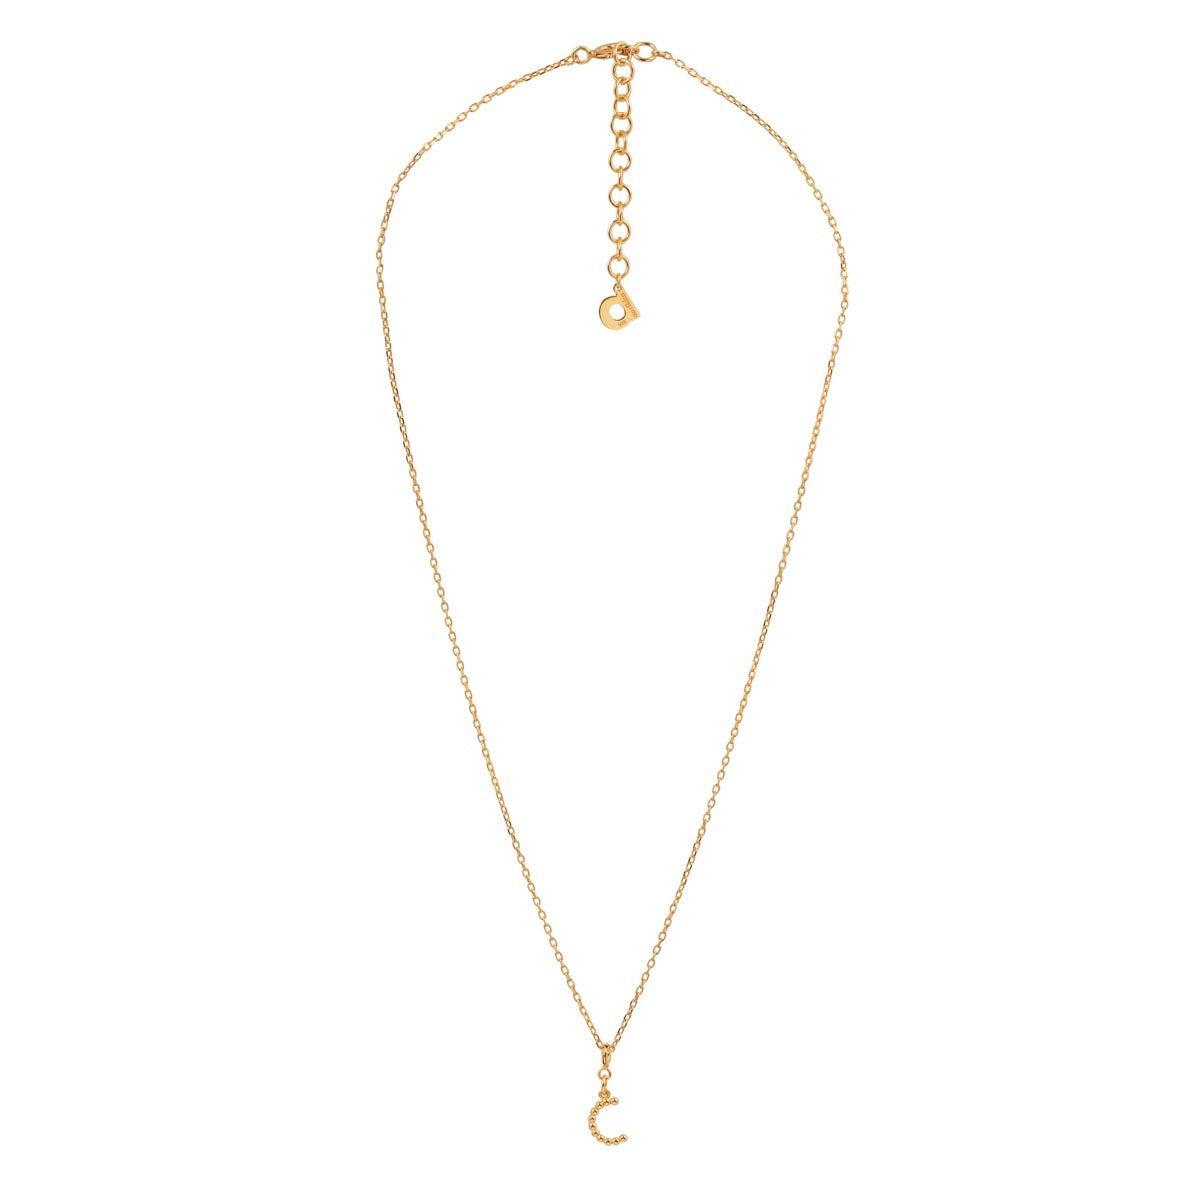 Yllätys Monogram Necklace C, gold-plated silver